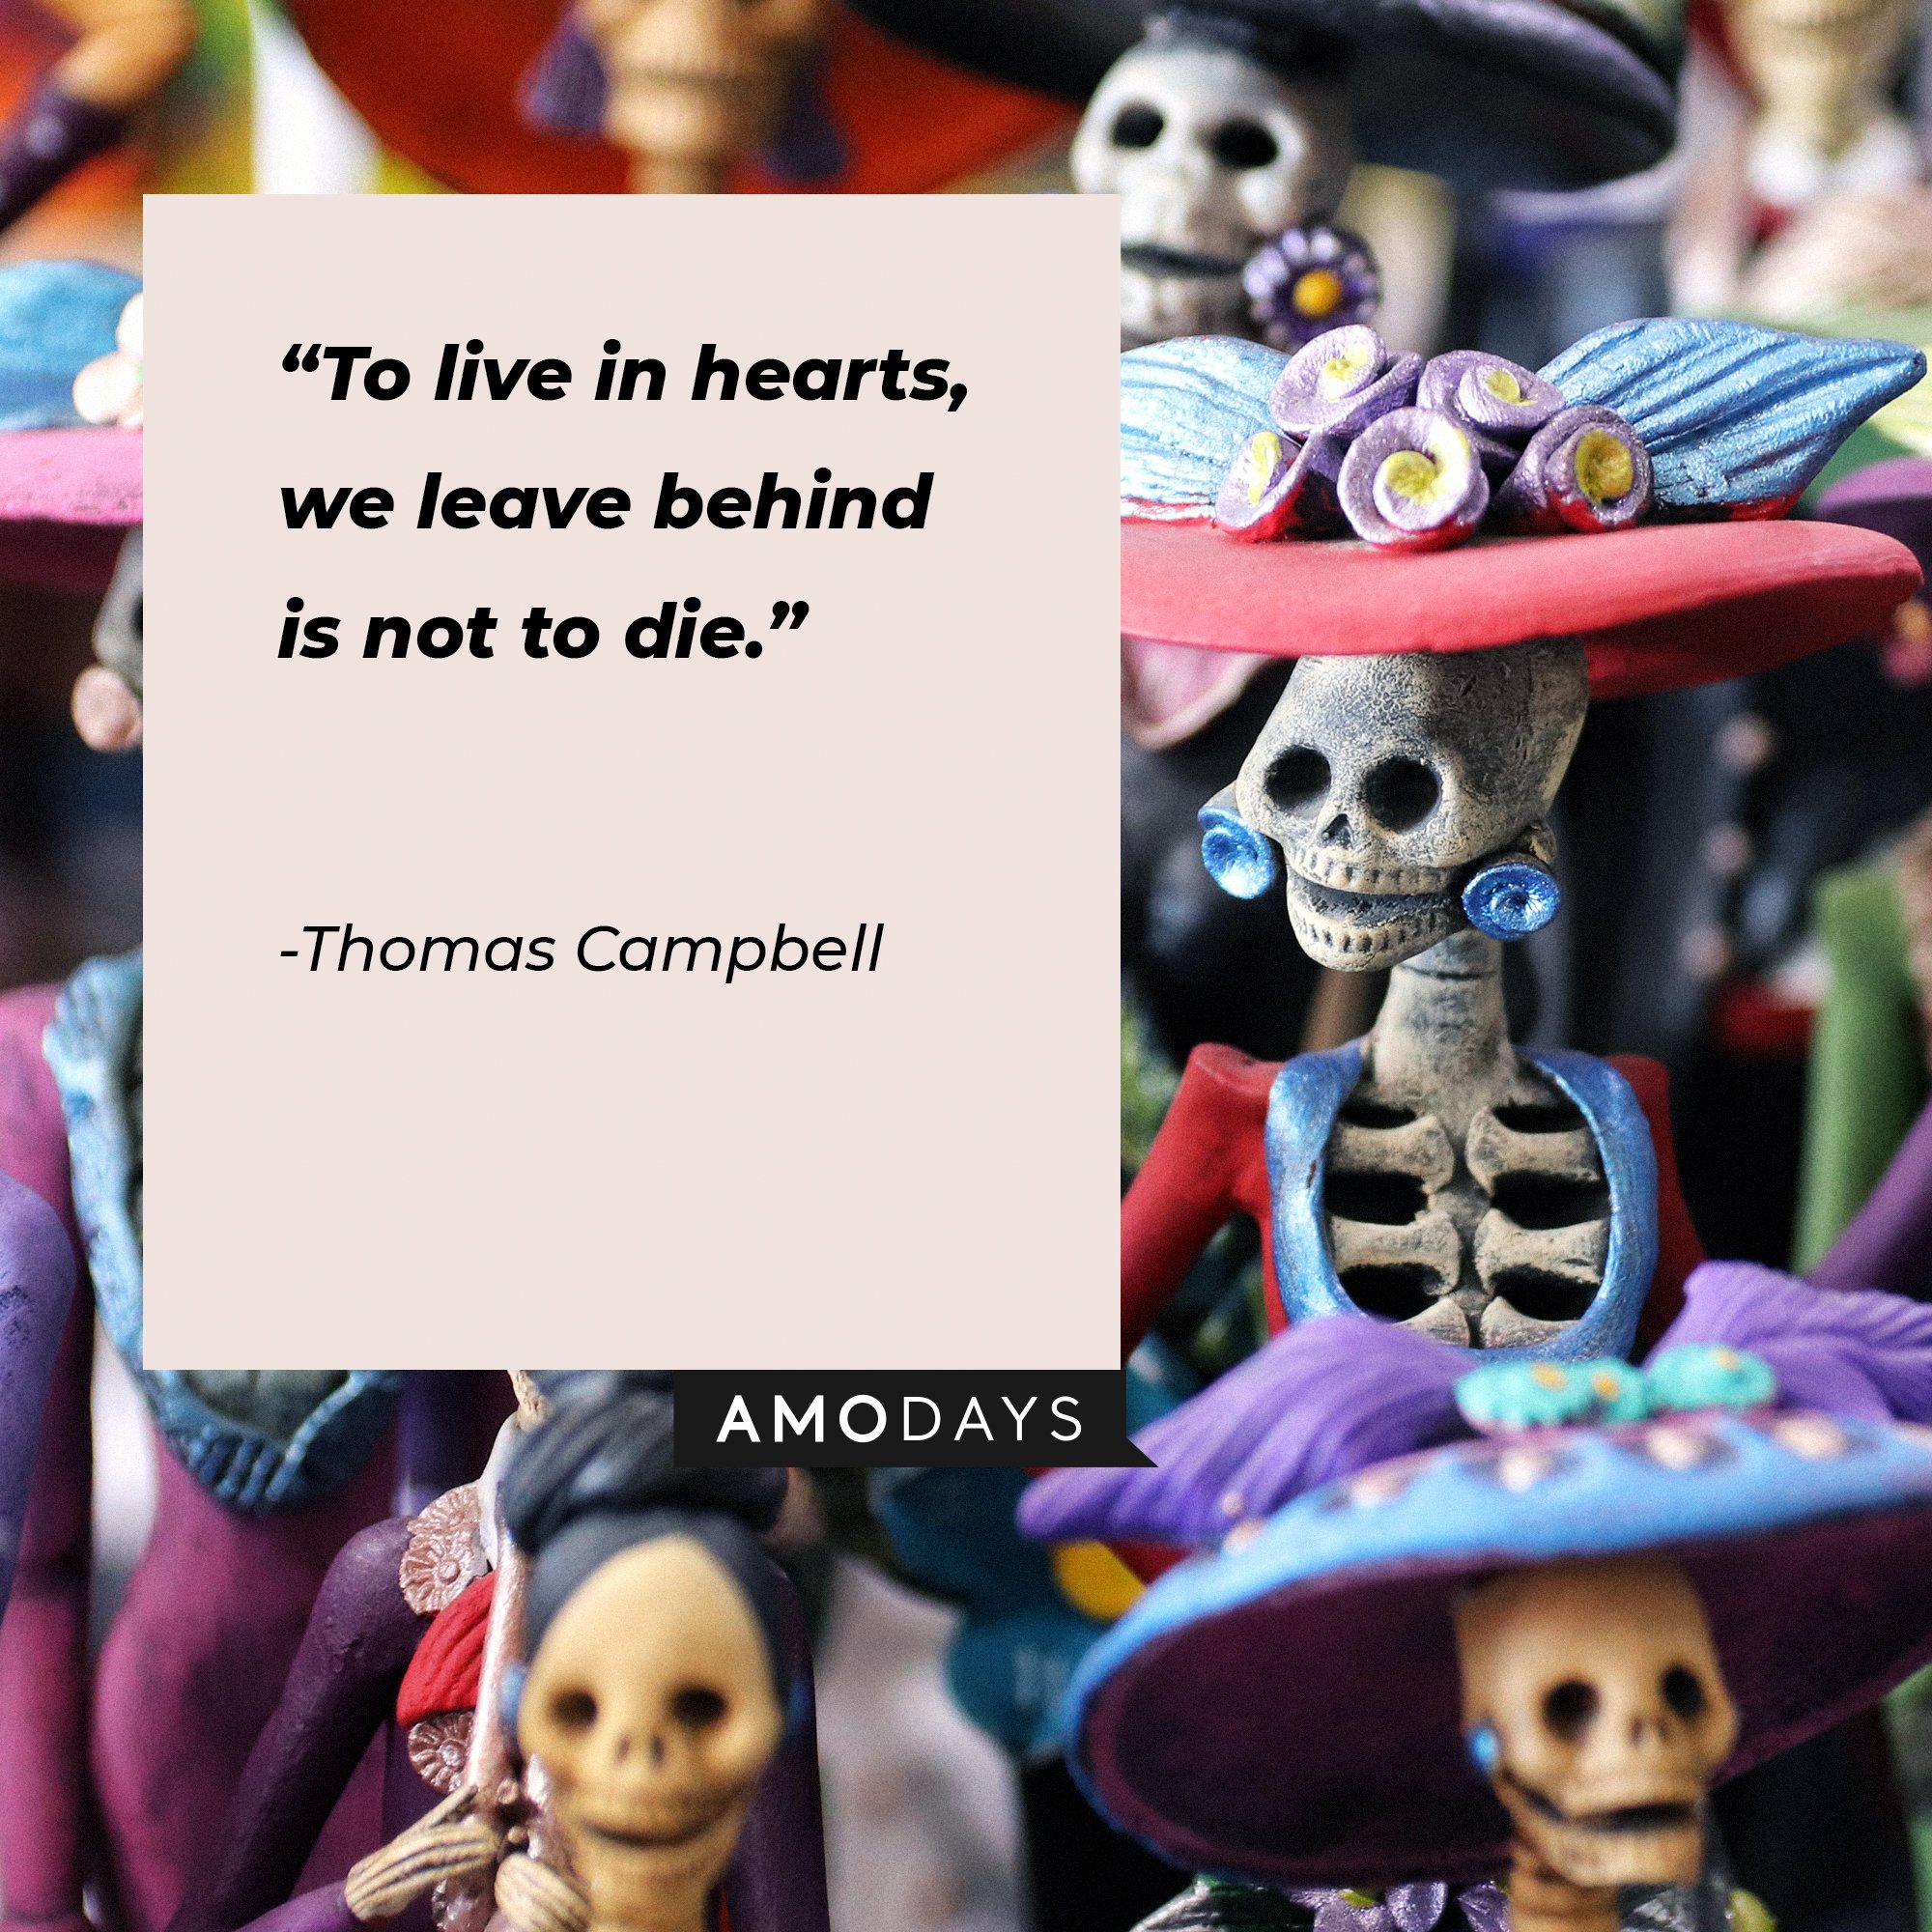 Thomas Campbell’s quote: "To live in hearts, we leave behind is not to die." | Image: AmoDays   